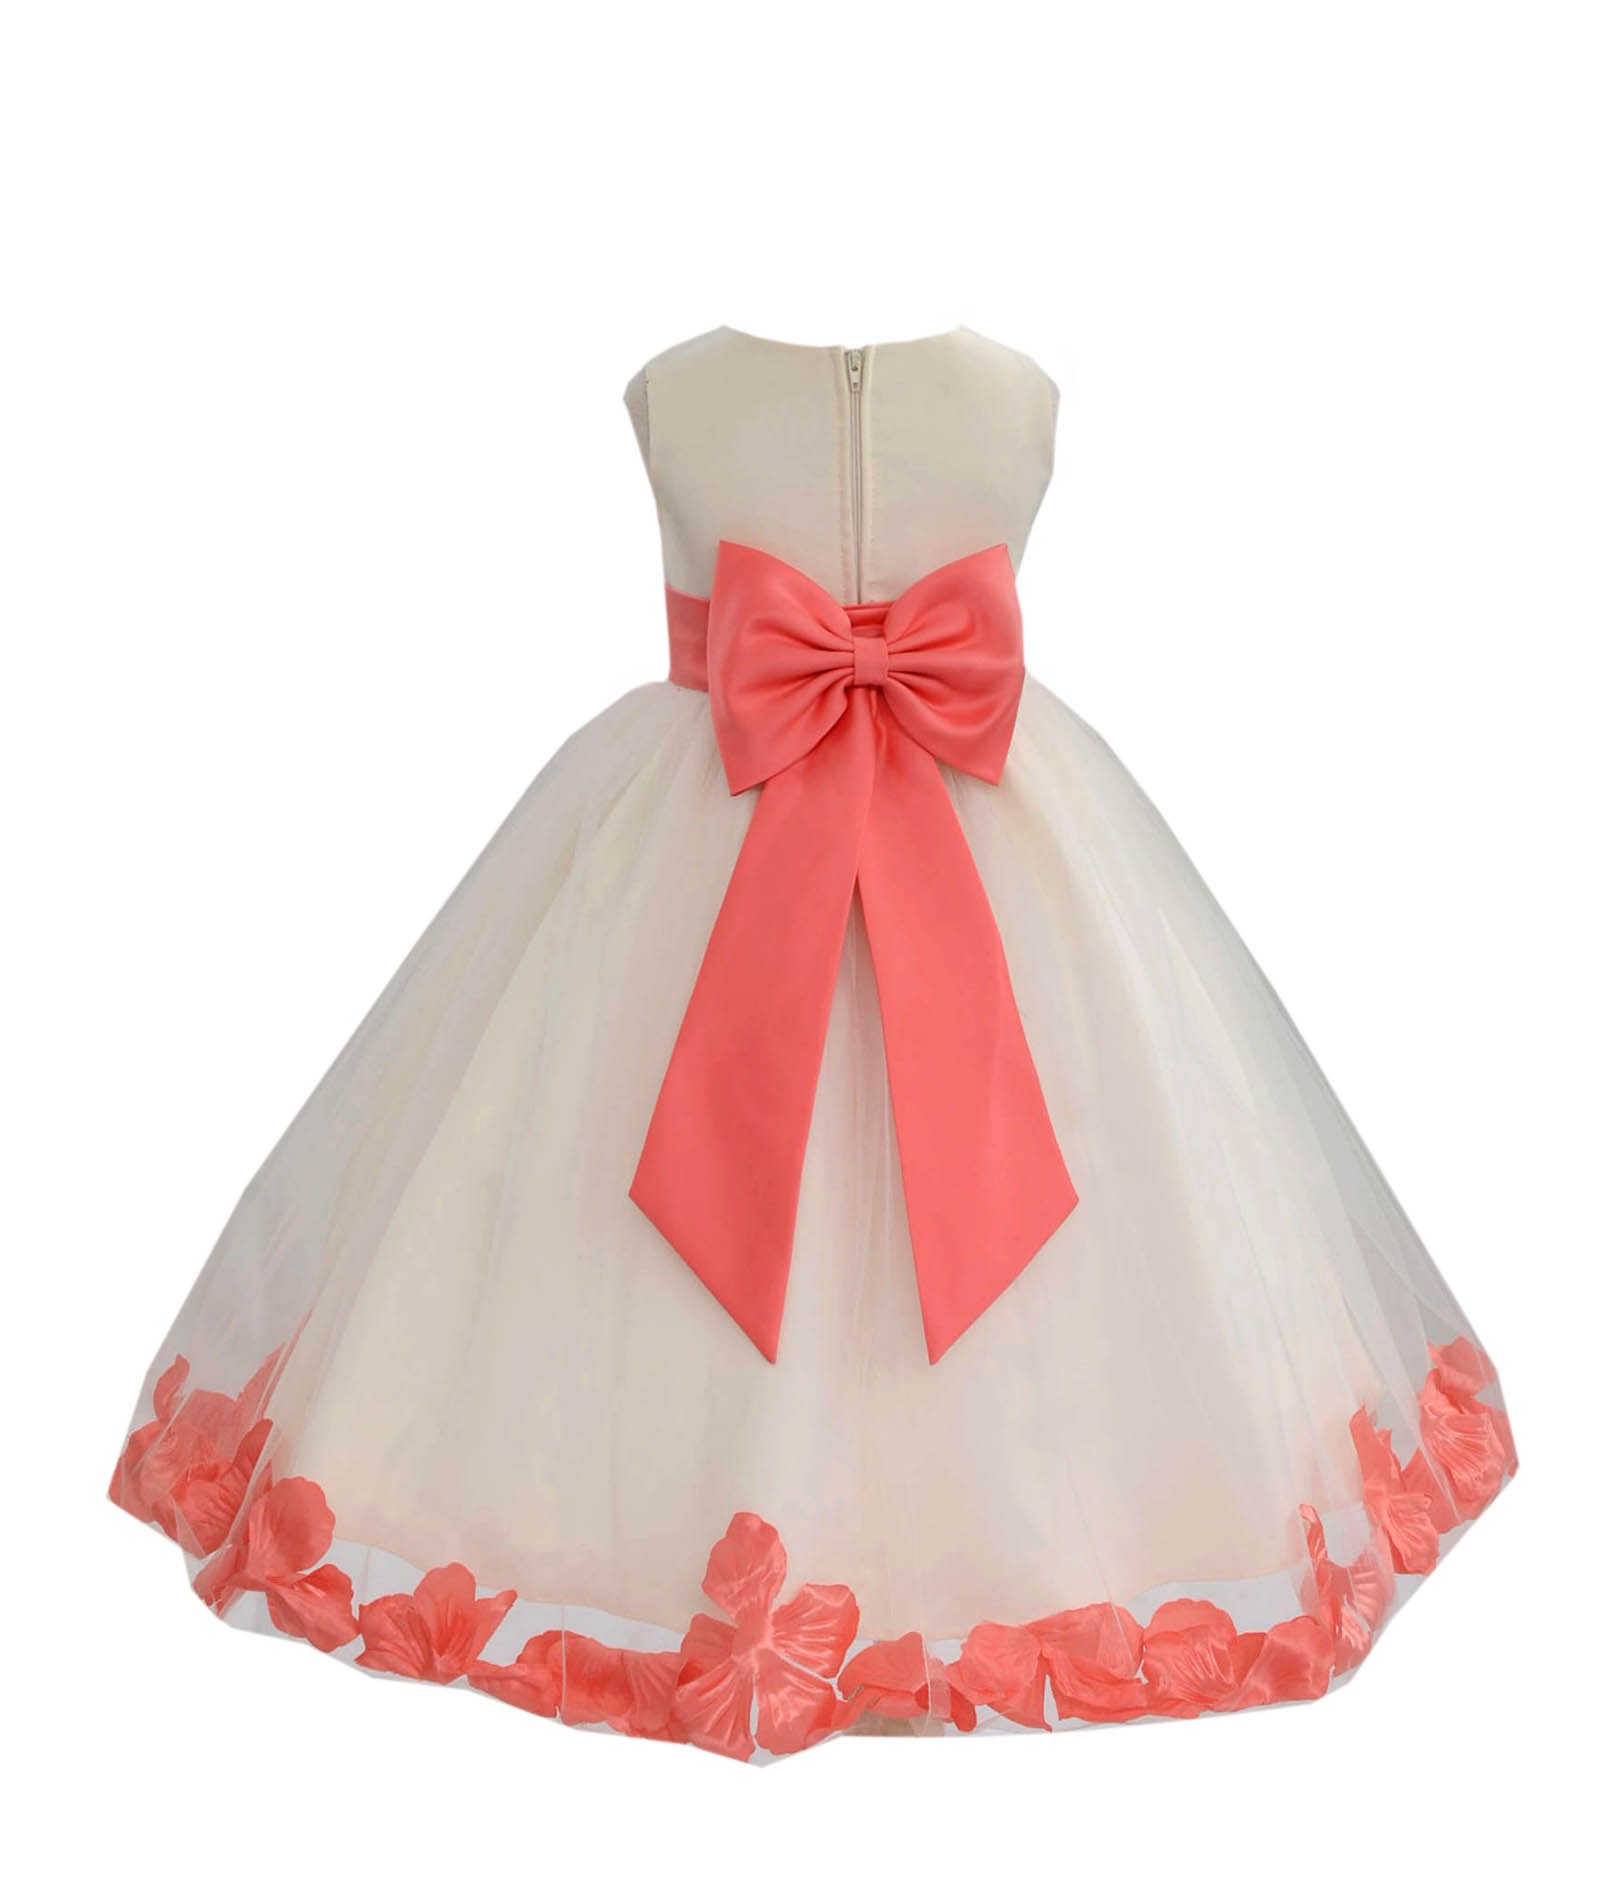 Ivory/Coral Tulle Rose Petals Flower Girl Dress Recital 302a